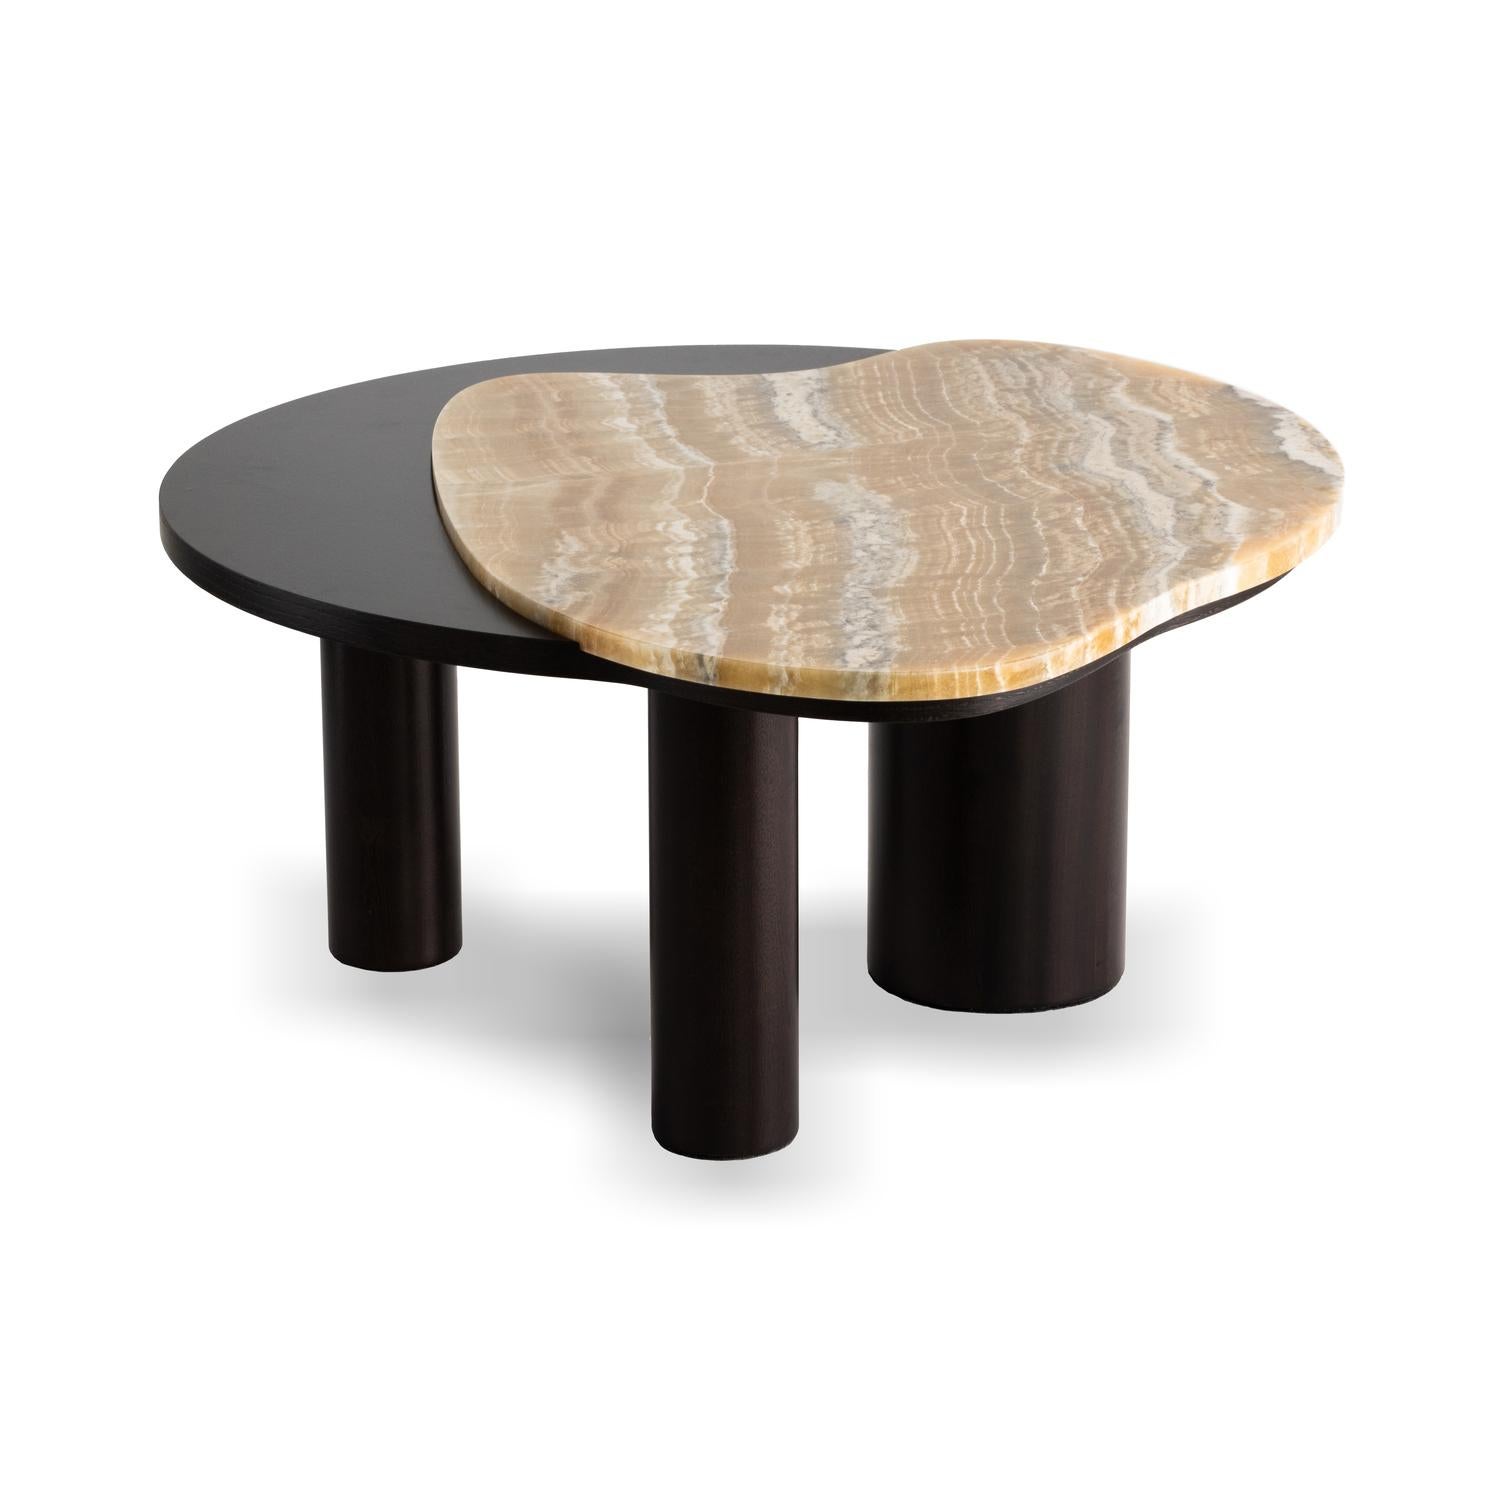 Bordeira Coffee Table, Contemporary Collection, Handcrafted in Portugal - Europe by Greenapple.

Designed by Rute Martins for the Contemporary Collection and inspired by the lines of the beautiful Bordeira beach, this low table adds a representation